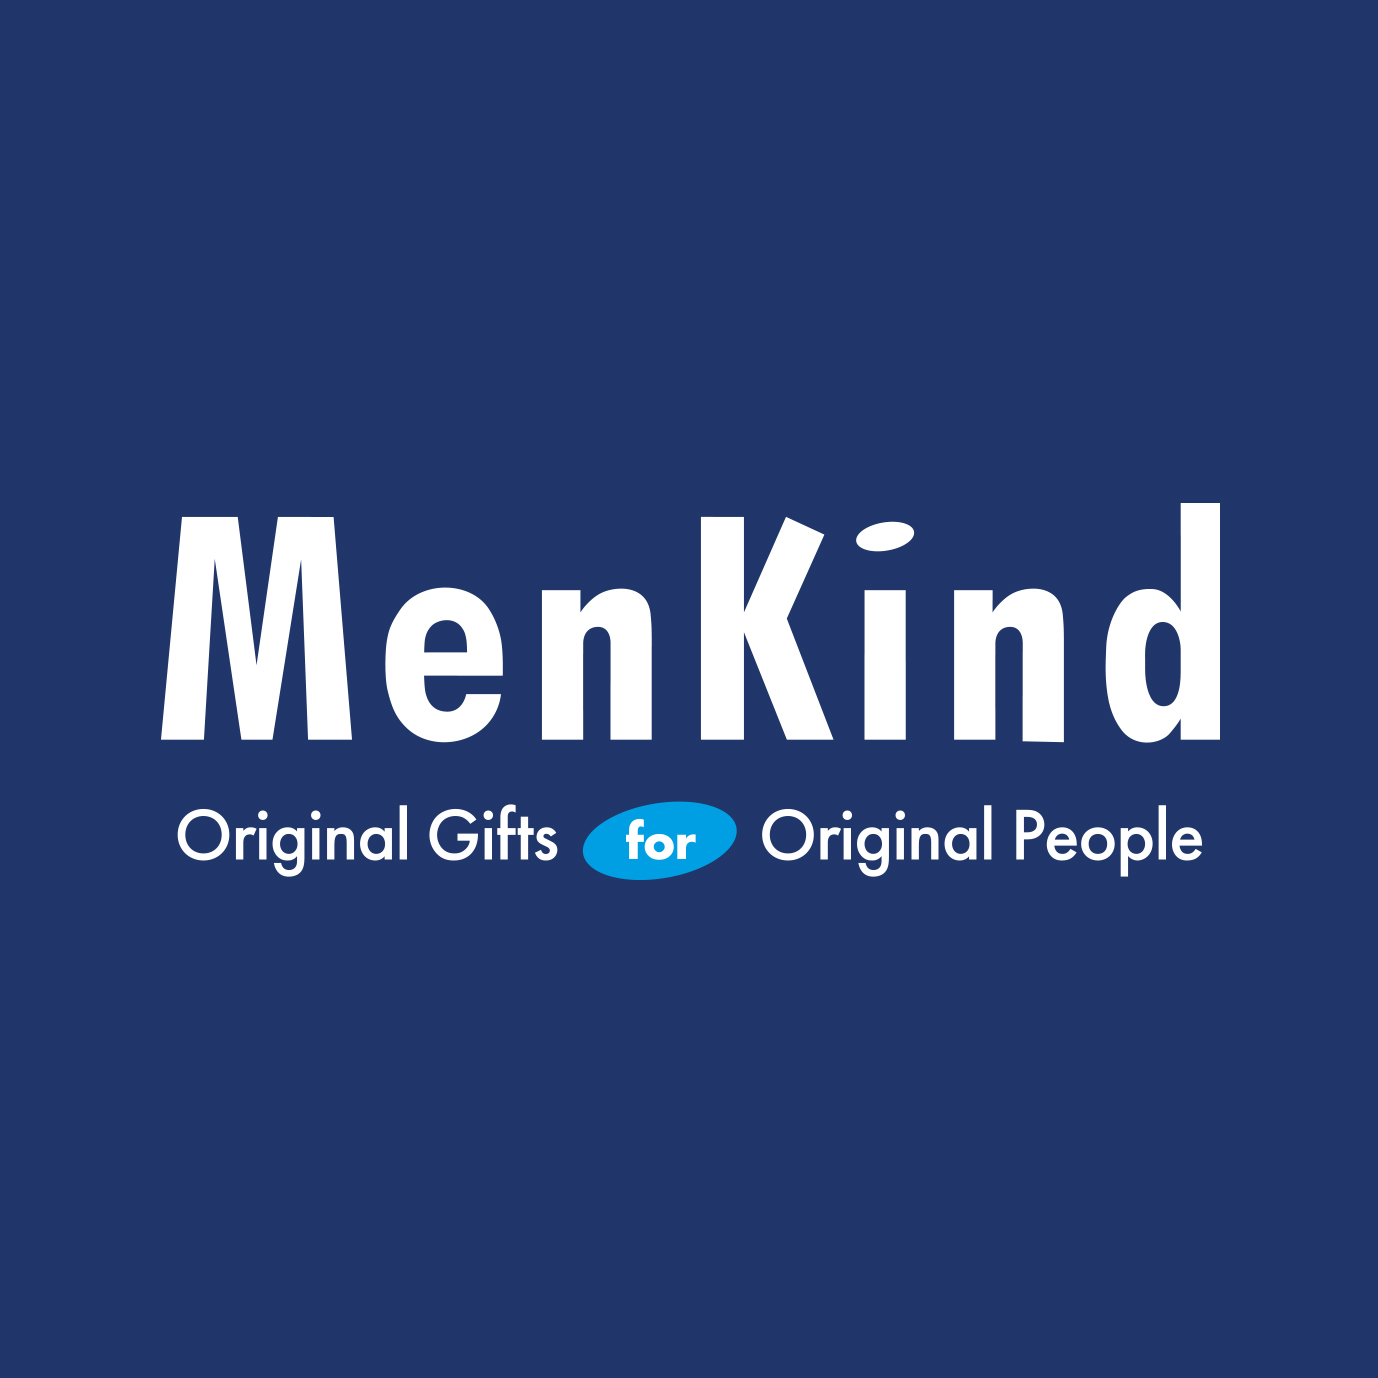 Up To 33% Off Gifts For Kids At MenKind